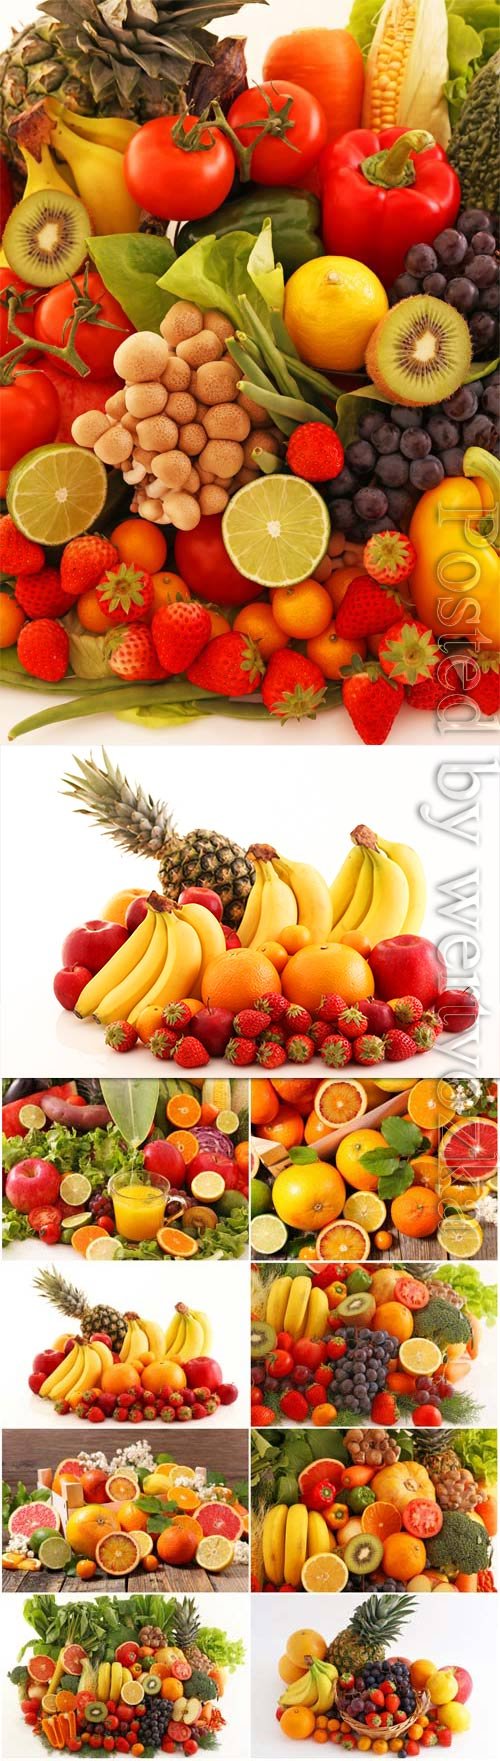 Set of fresh fruits and berries stock photo